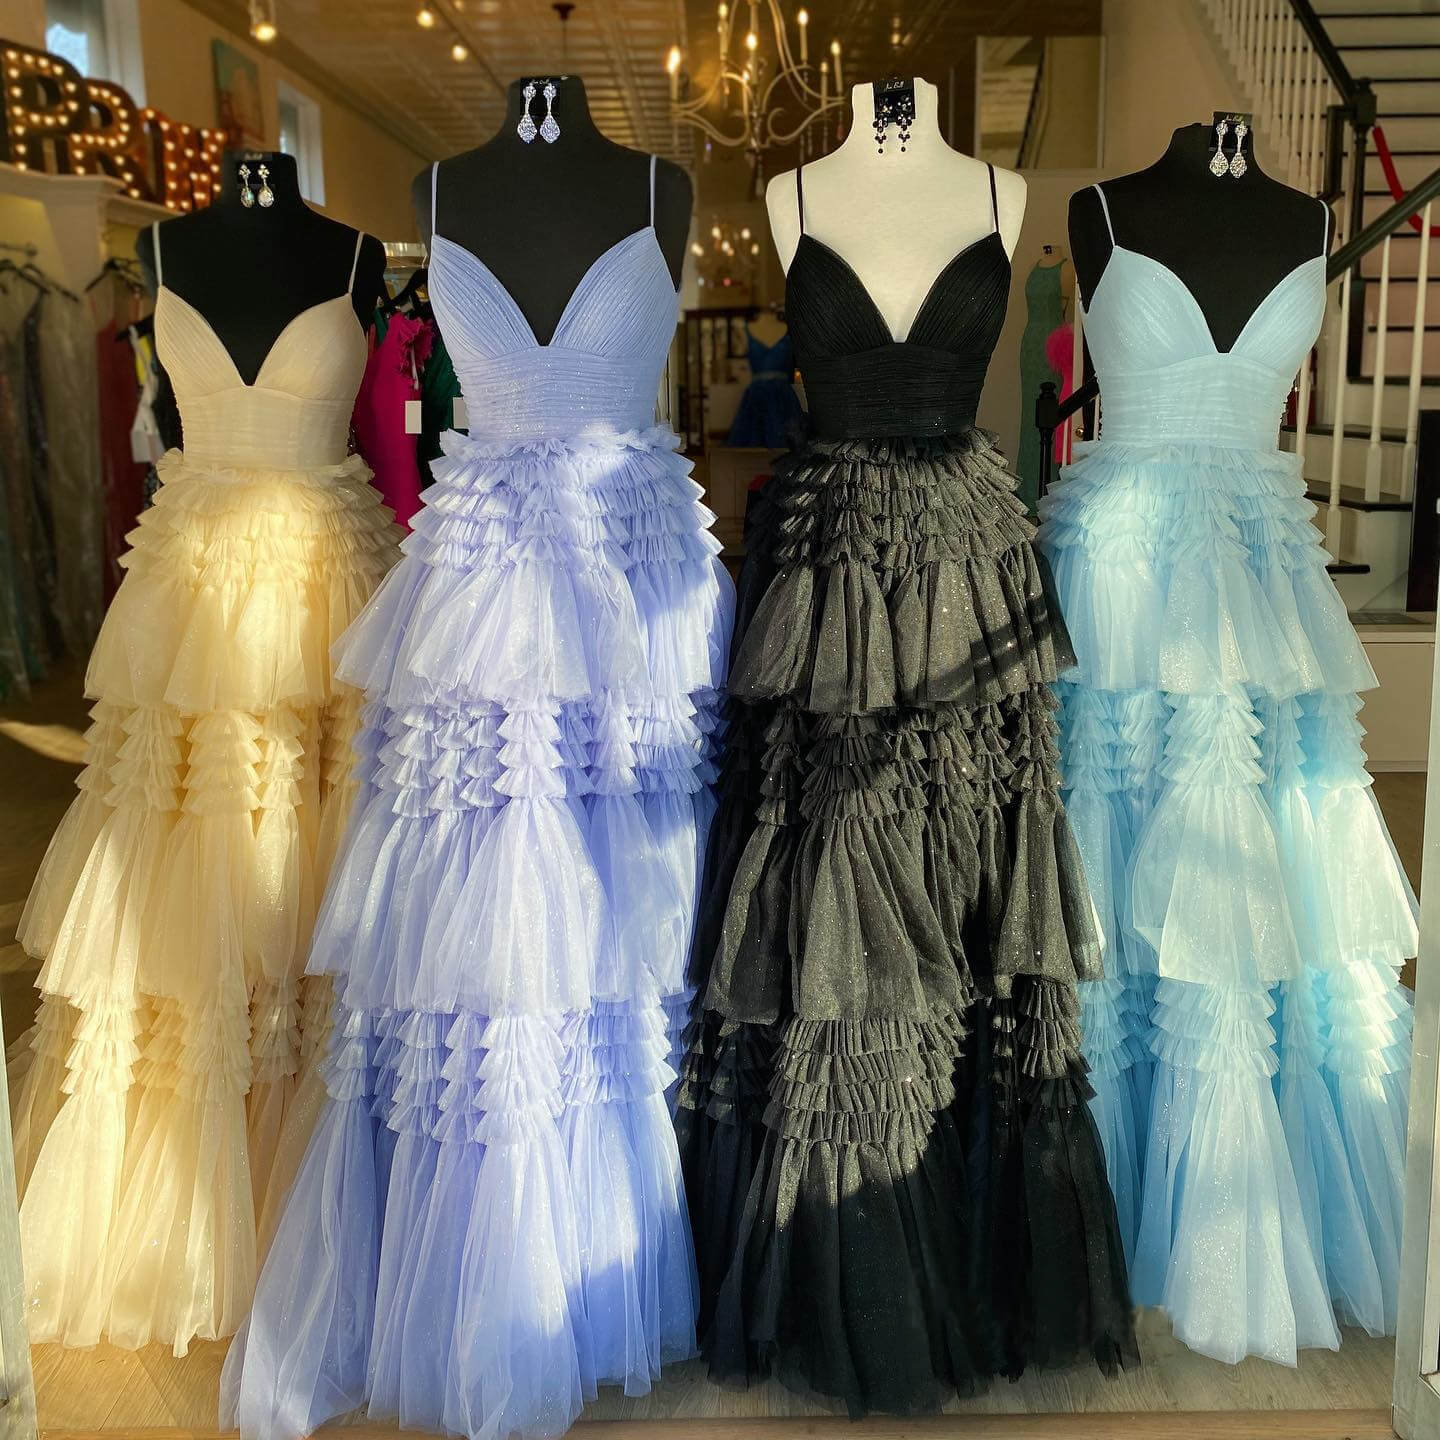 Bachelorette Party Theme, Pink V Neck Layers Tulle Long Ball Gown,Light Blue A Line Spaghetti Strap Evening Dresses